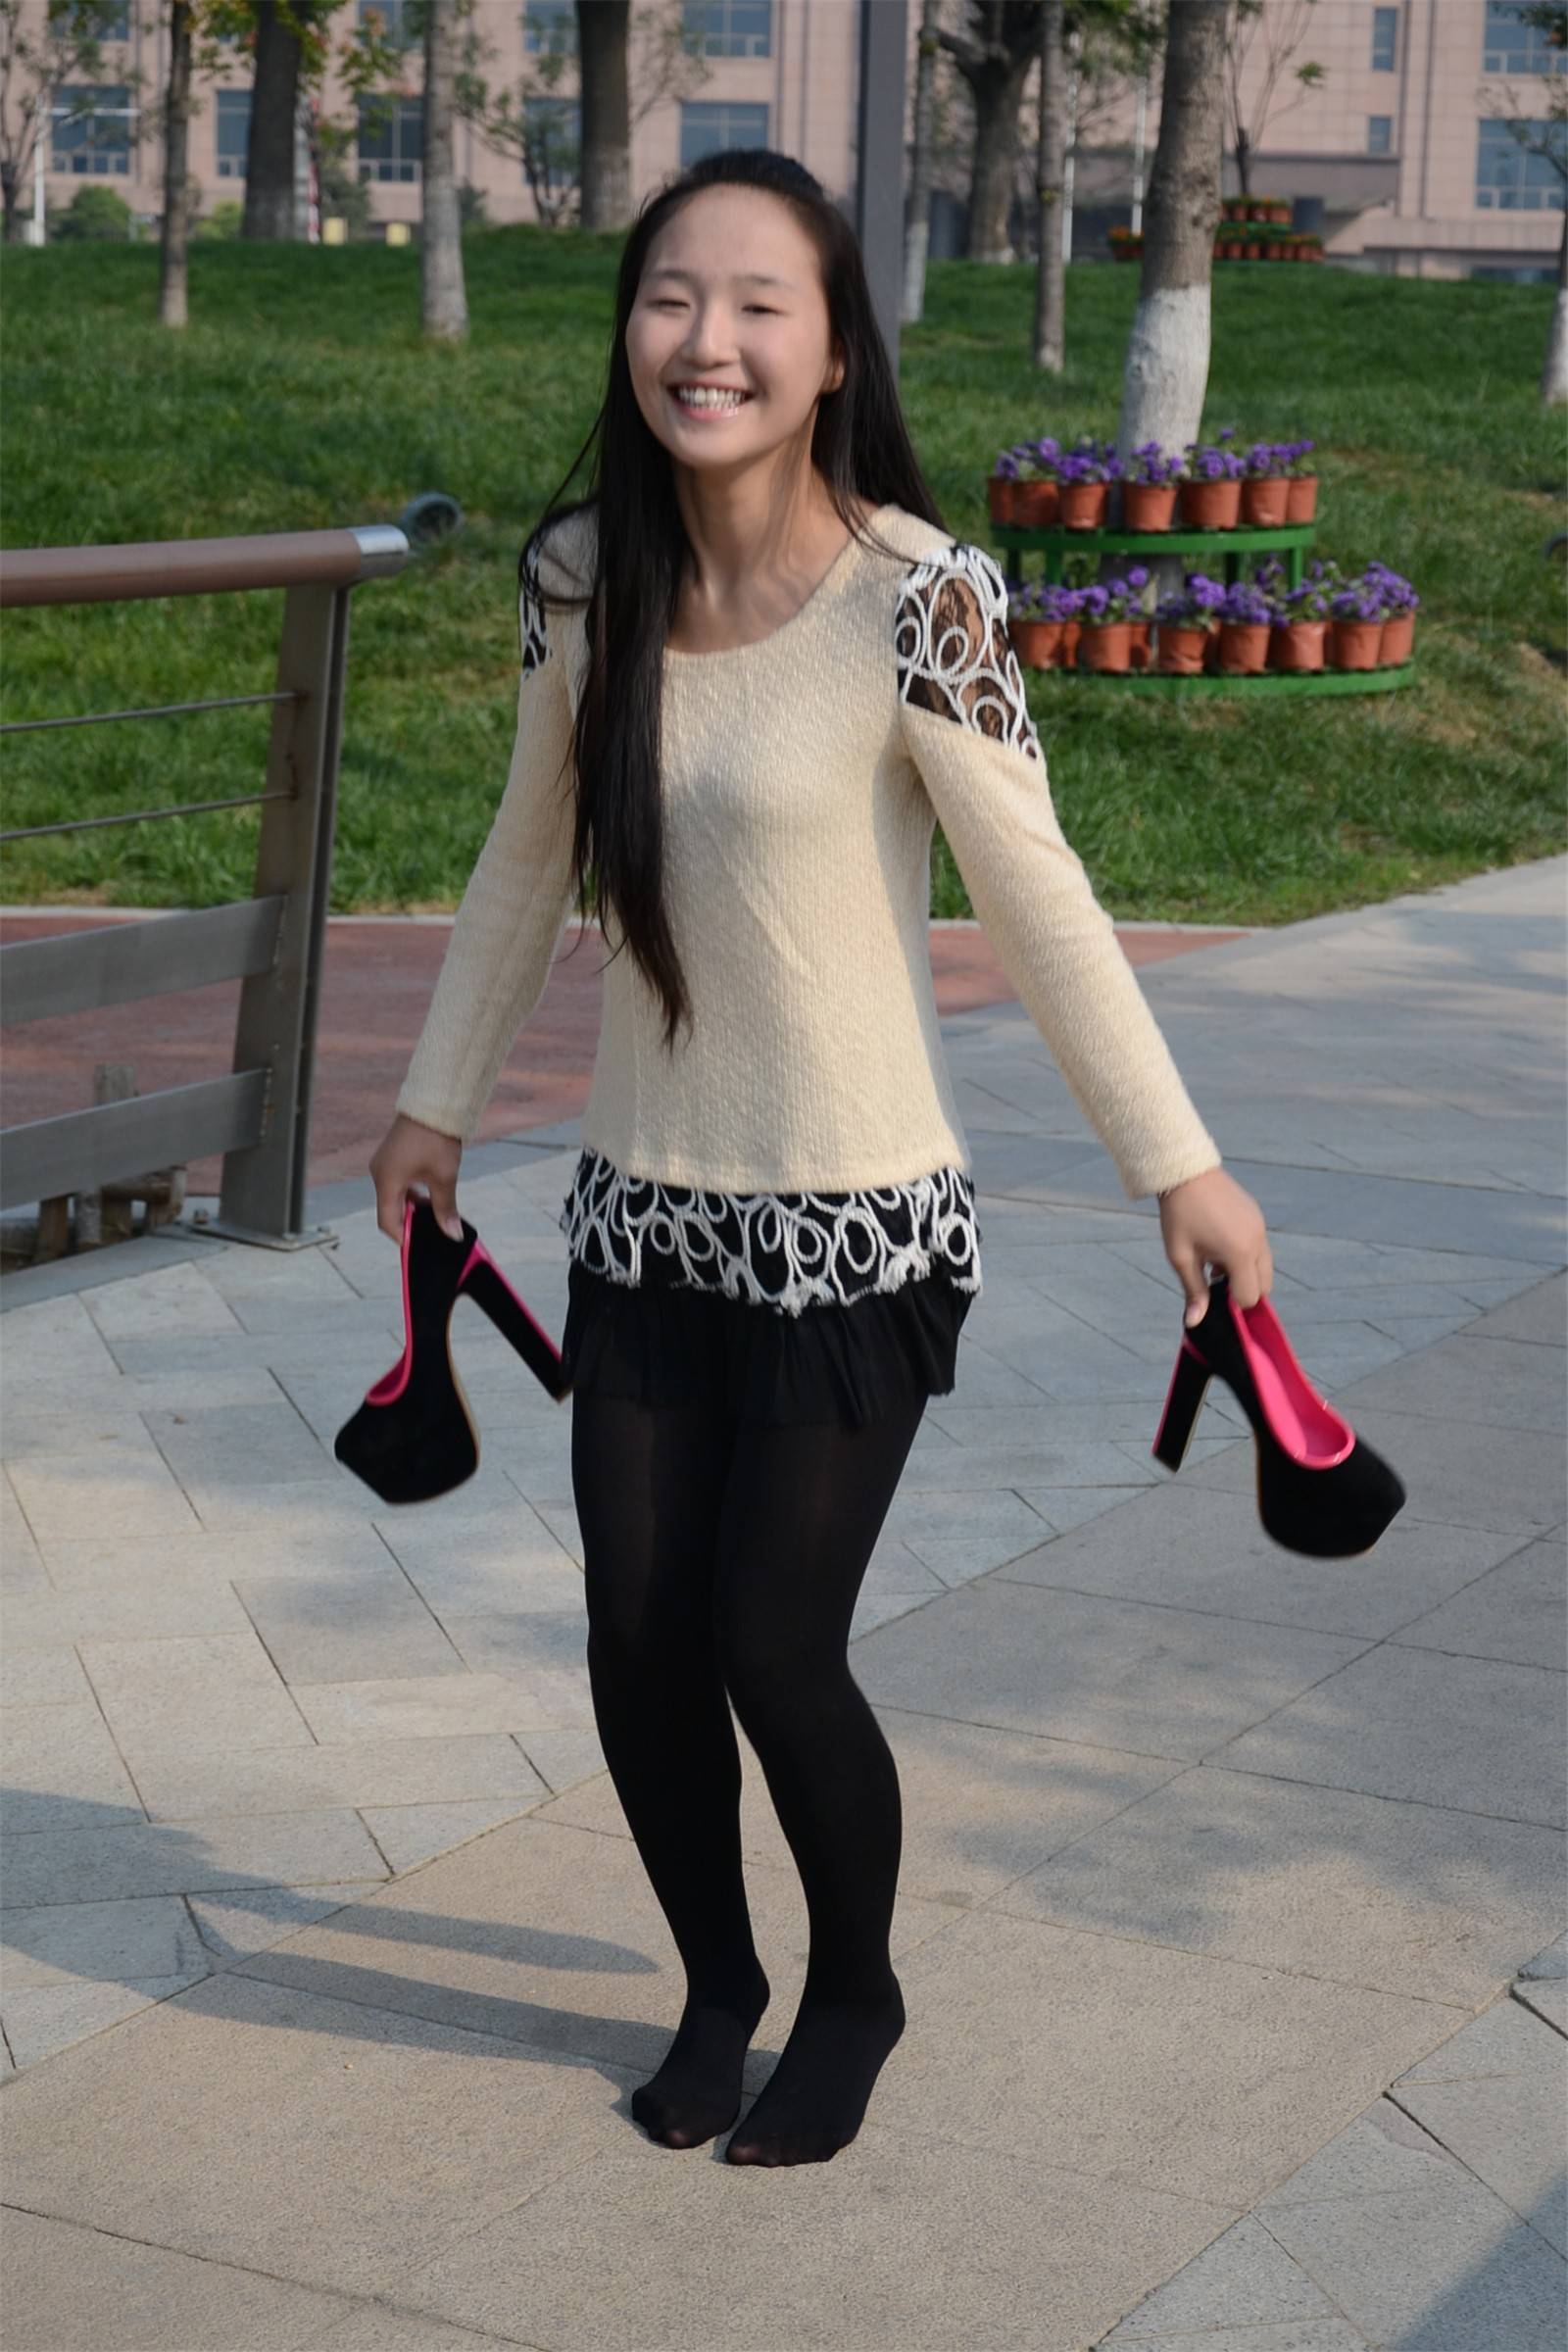 [outdoor Street Photo] 2013.11.25 skirt, stockings and high heel sister